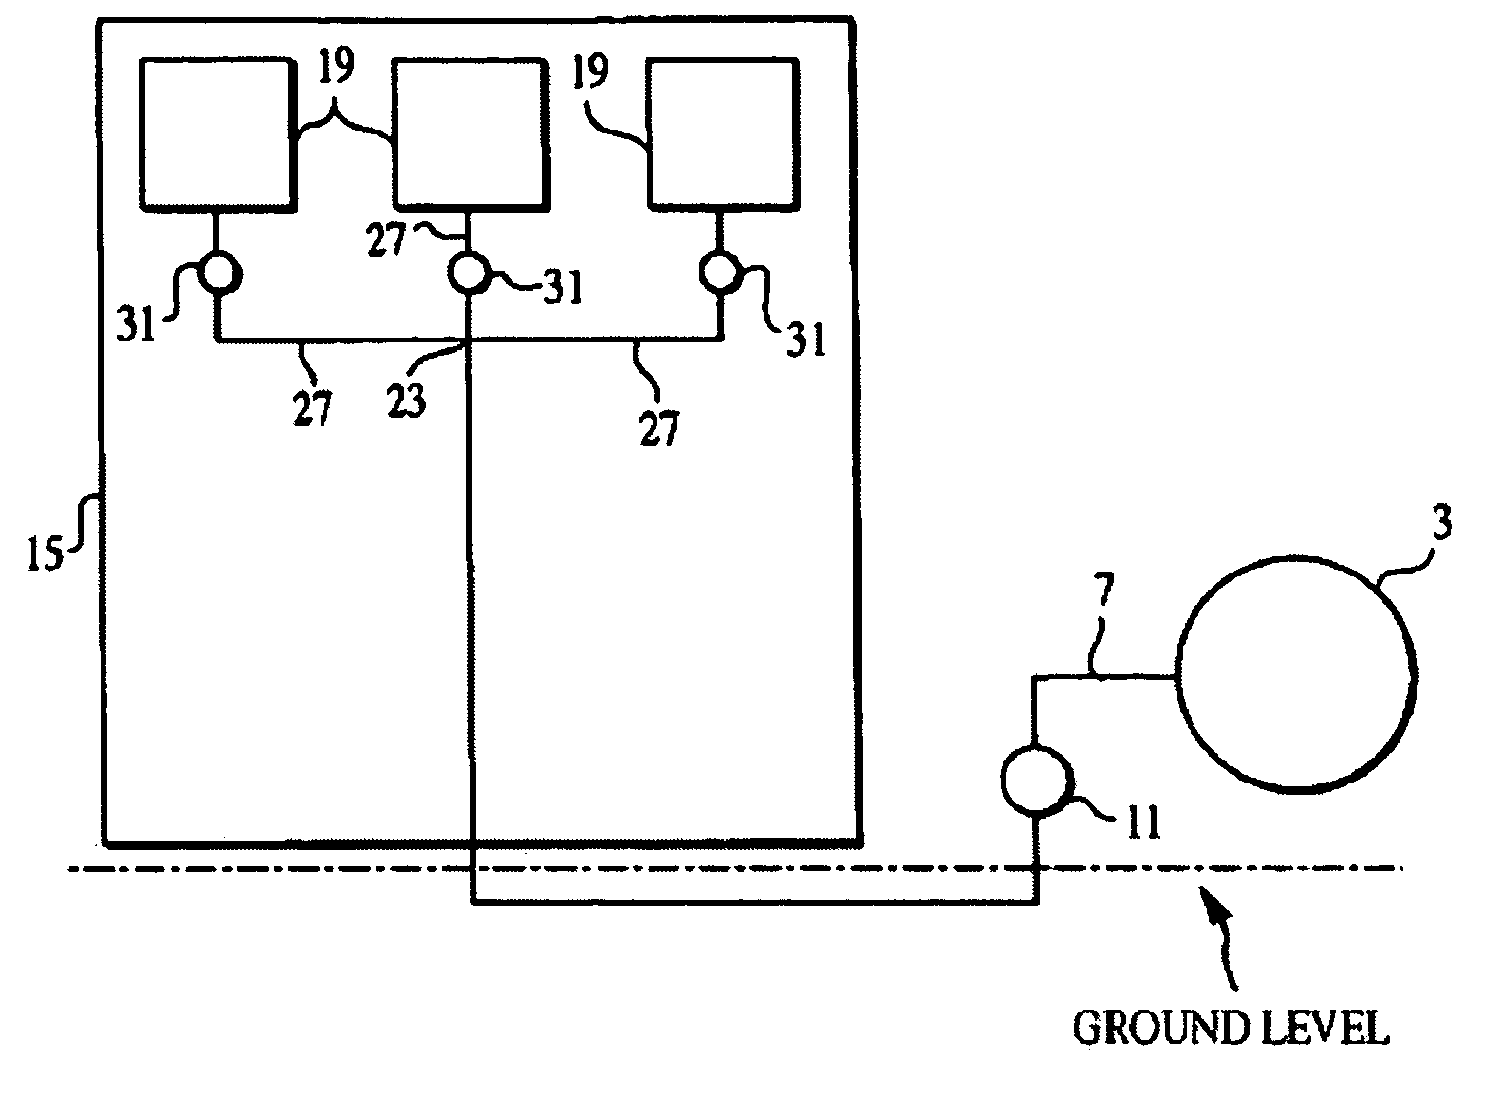 System and method for detecting water vapor within natural gas